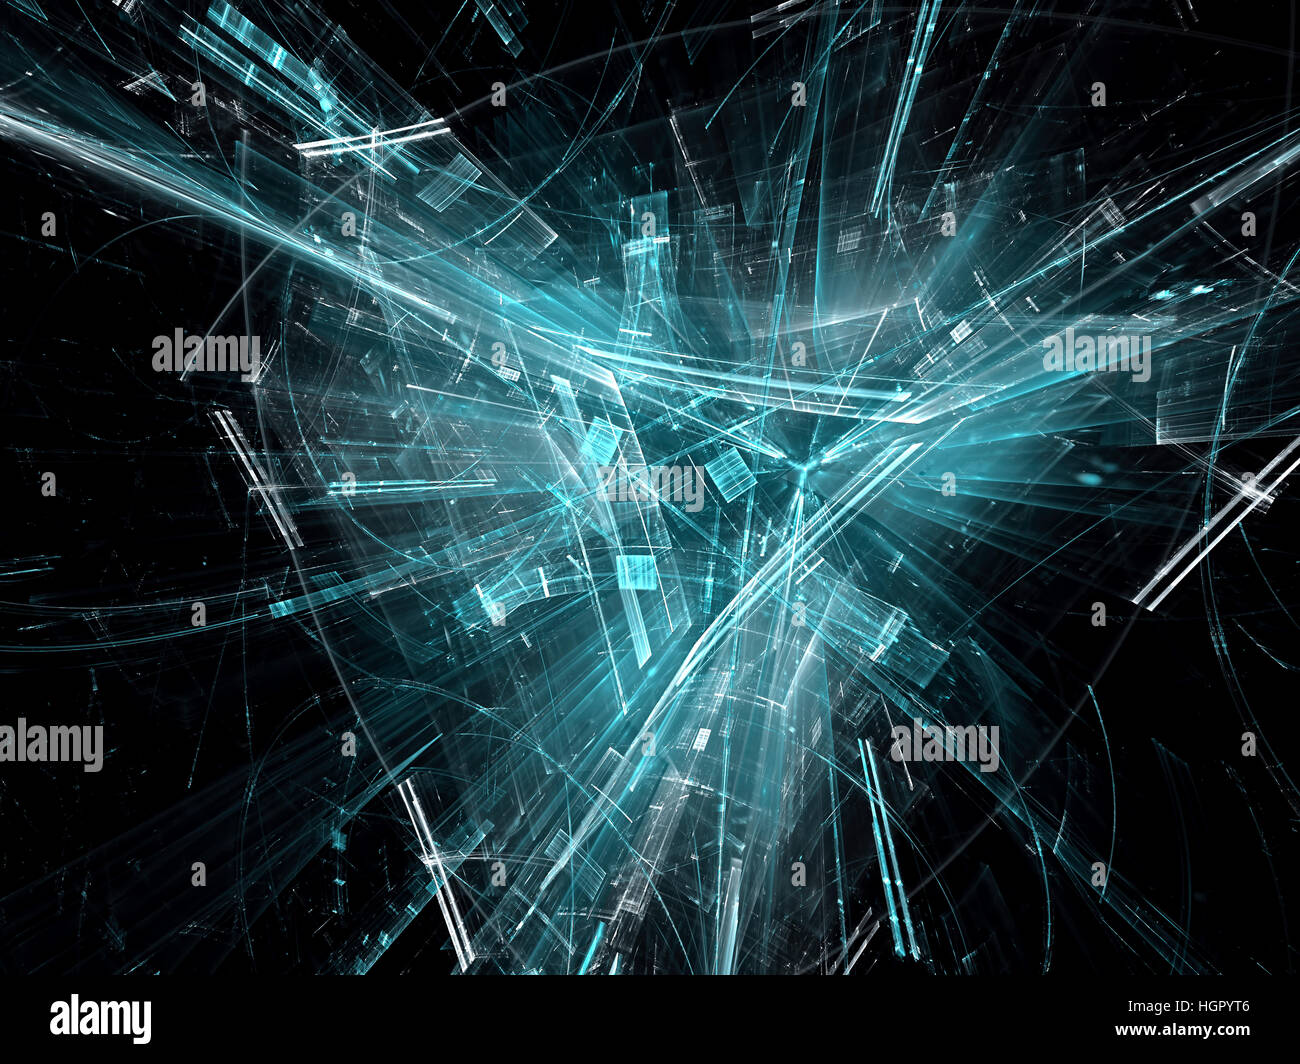 Technology design - abstract digitally generated image Stock Photo